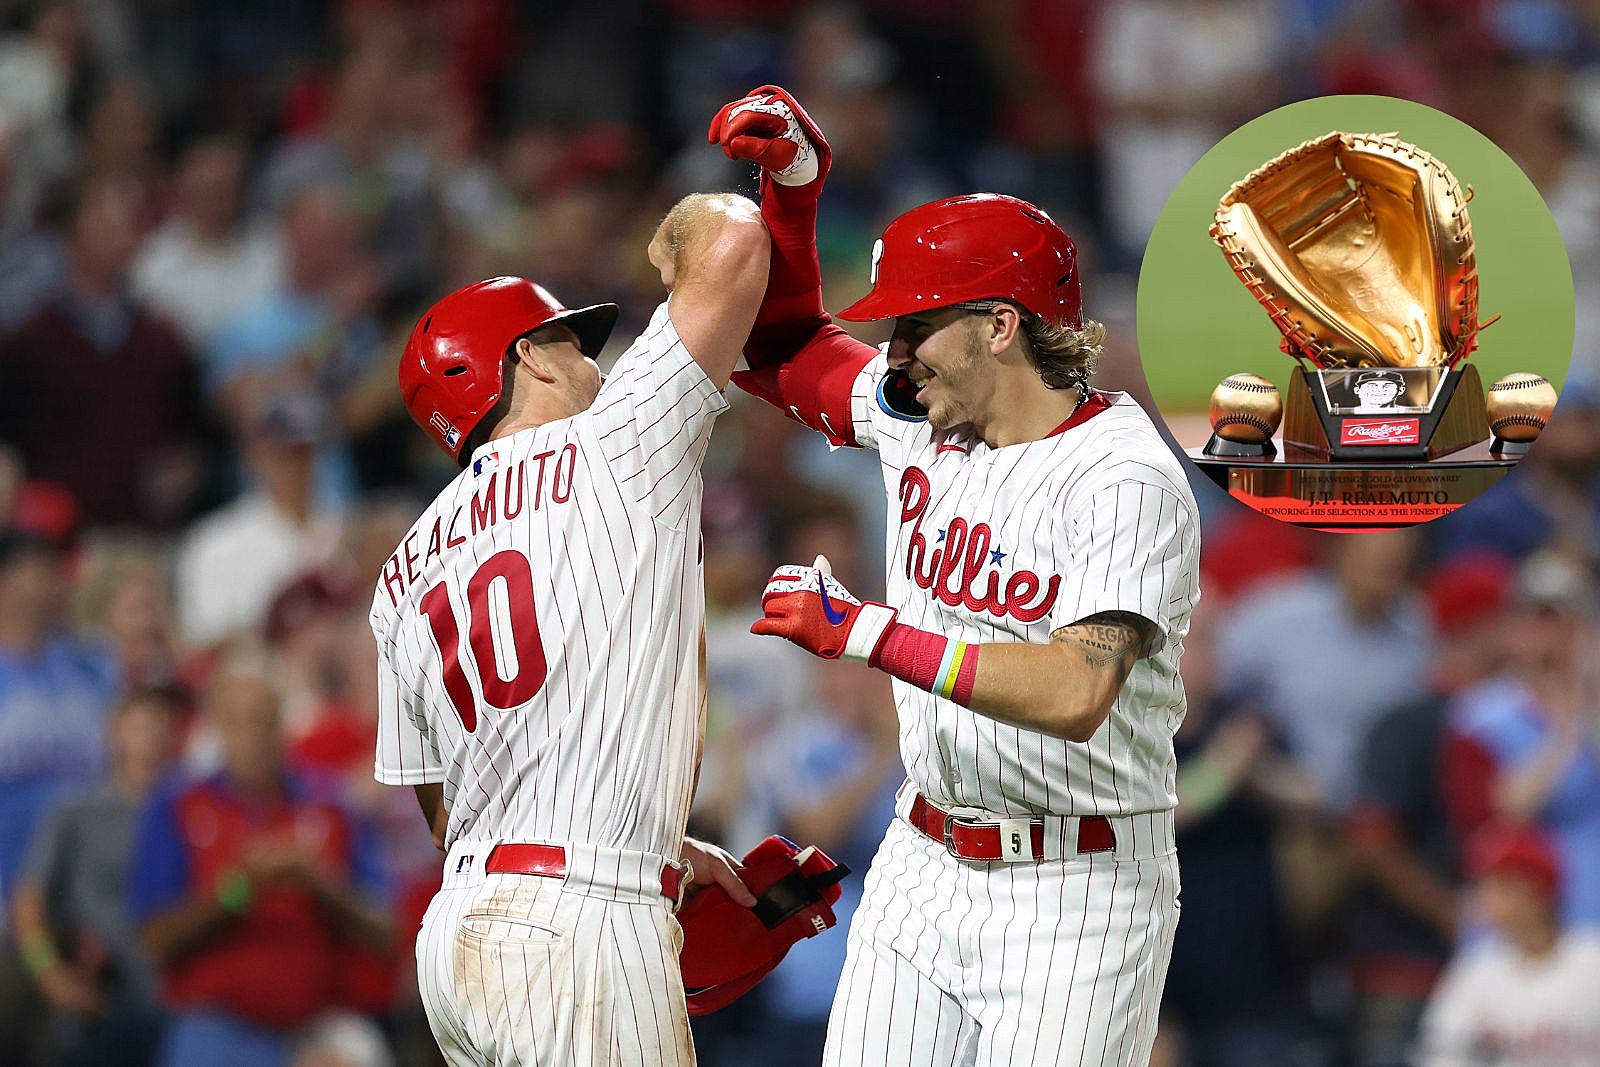 Phillies waste stellar performance by Ranger Suarez in Cincinnati, shut out  for 4th time in 7 games - CBS Philadelphia